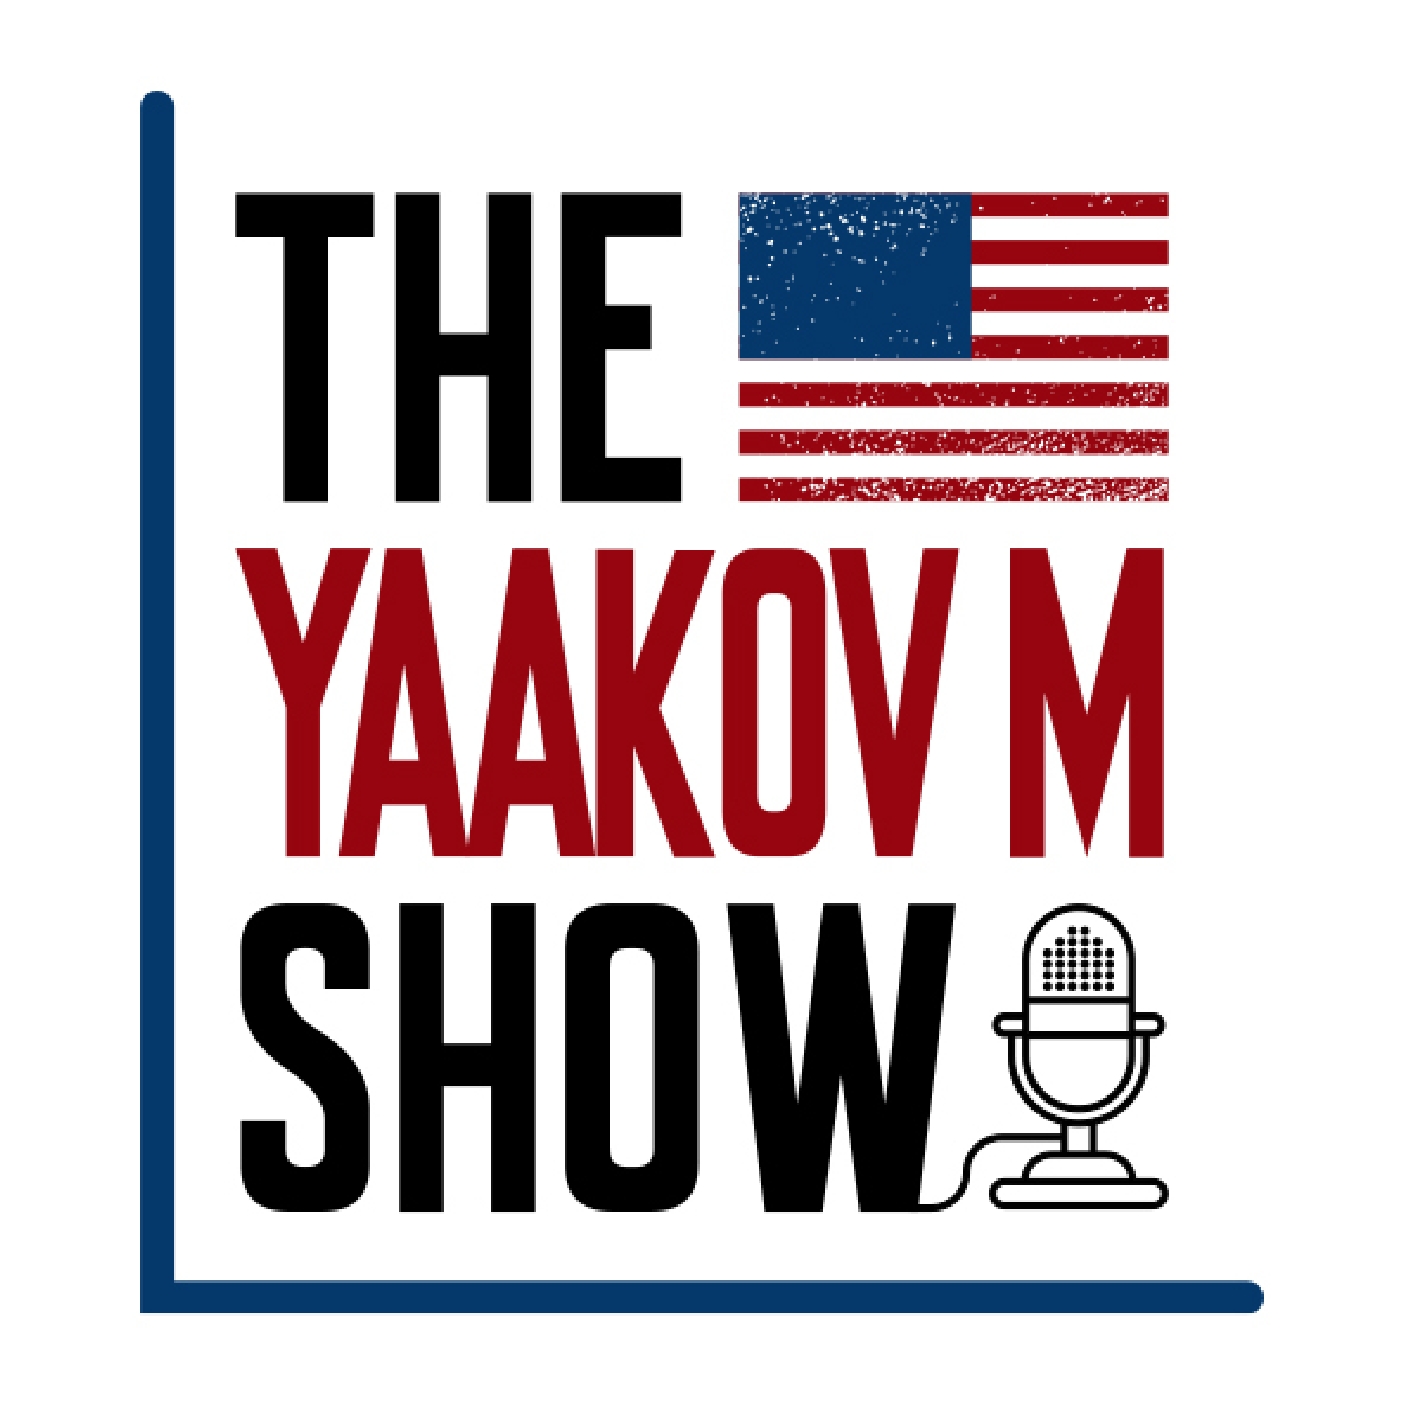 YAAKOV M: Hillary spied on Trump Tower, AOC says people are stealing because the Child Tax Credit expired, Judge appointed by Clinton tosses out Sarah Palin lawsuit, much more